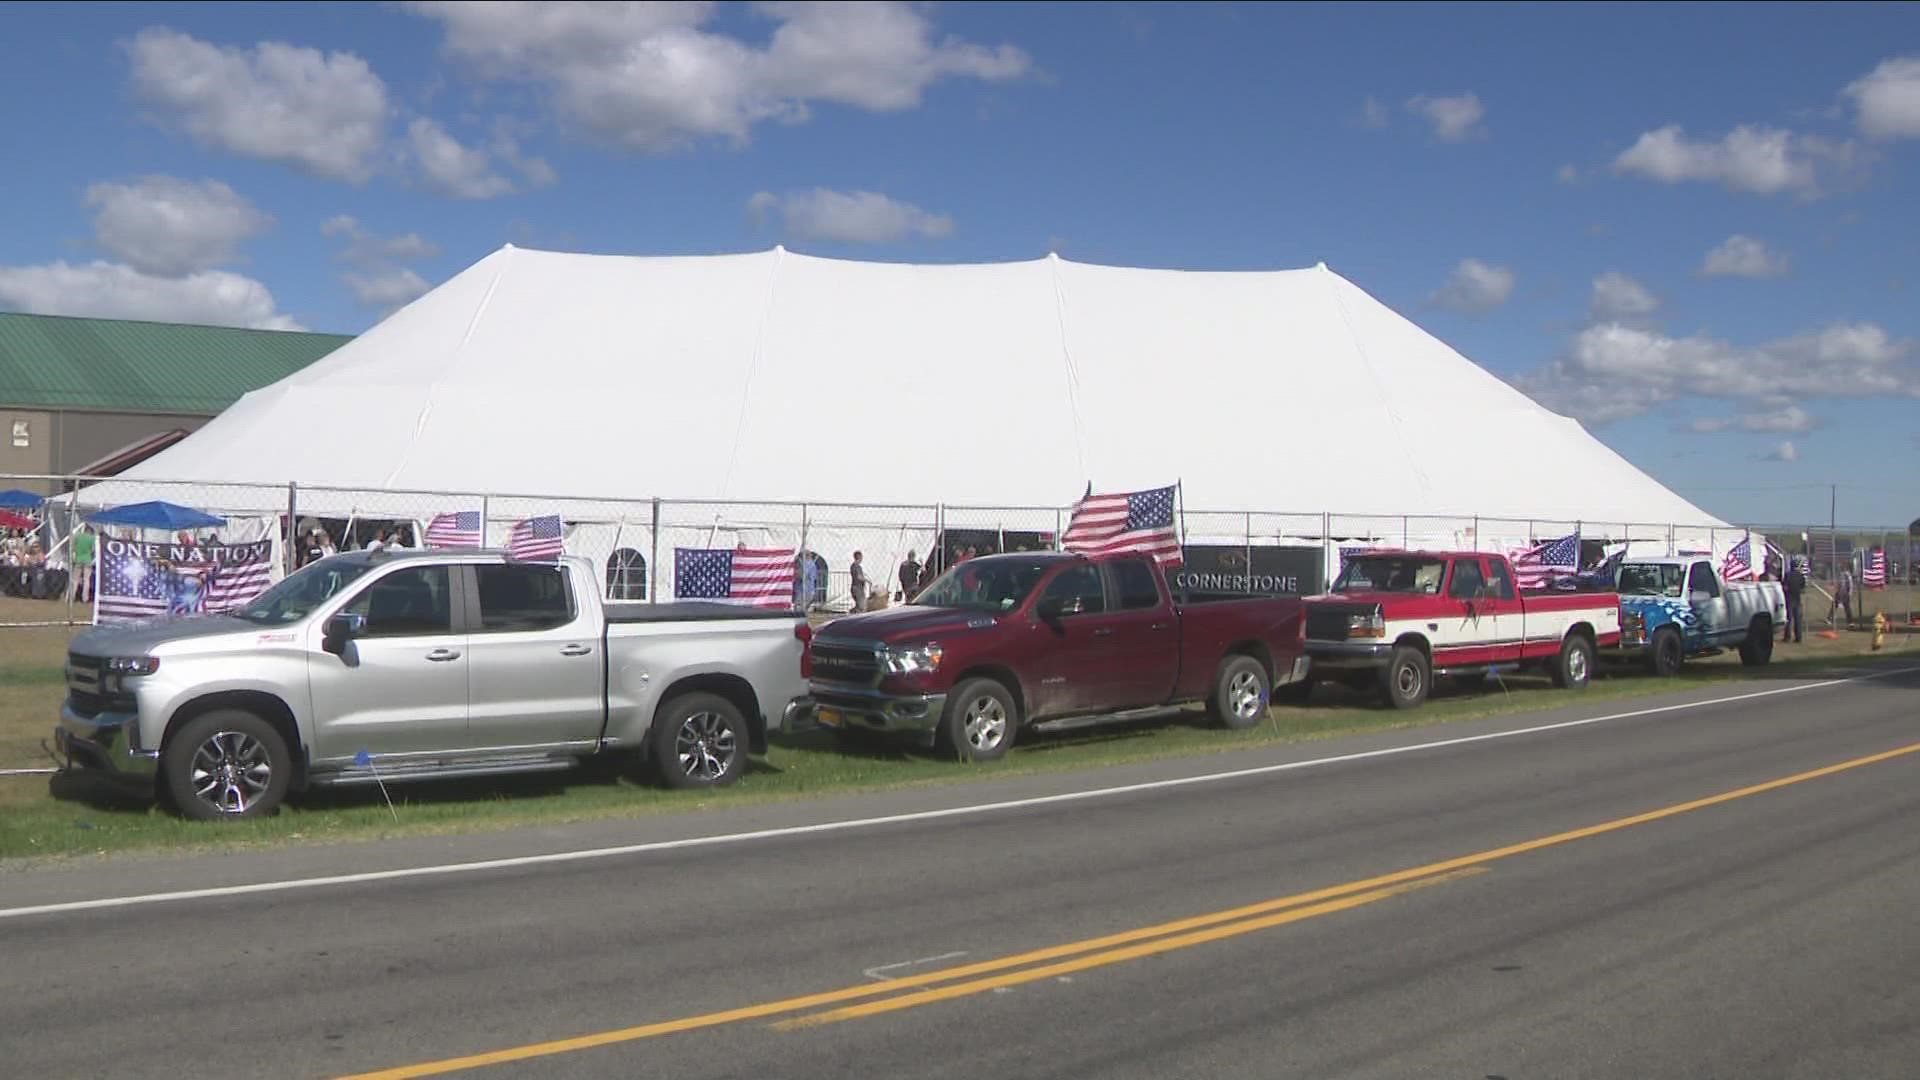 From the town of Batavia in Genesee County, it's the first day of an event which has generated controversy with a mix of politics, religion, and some claims.